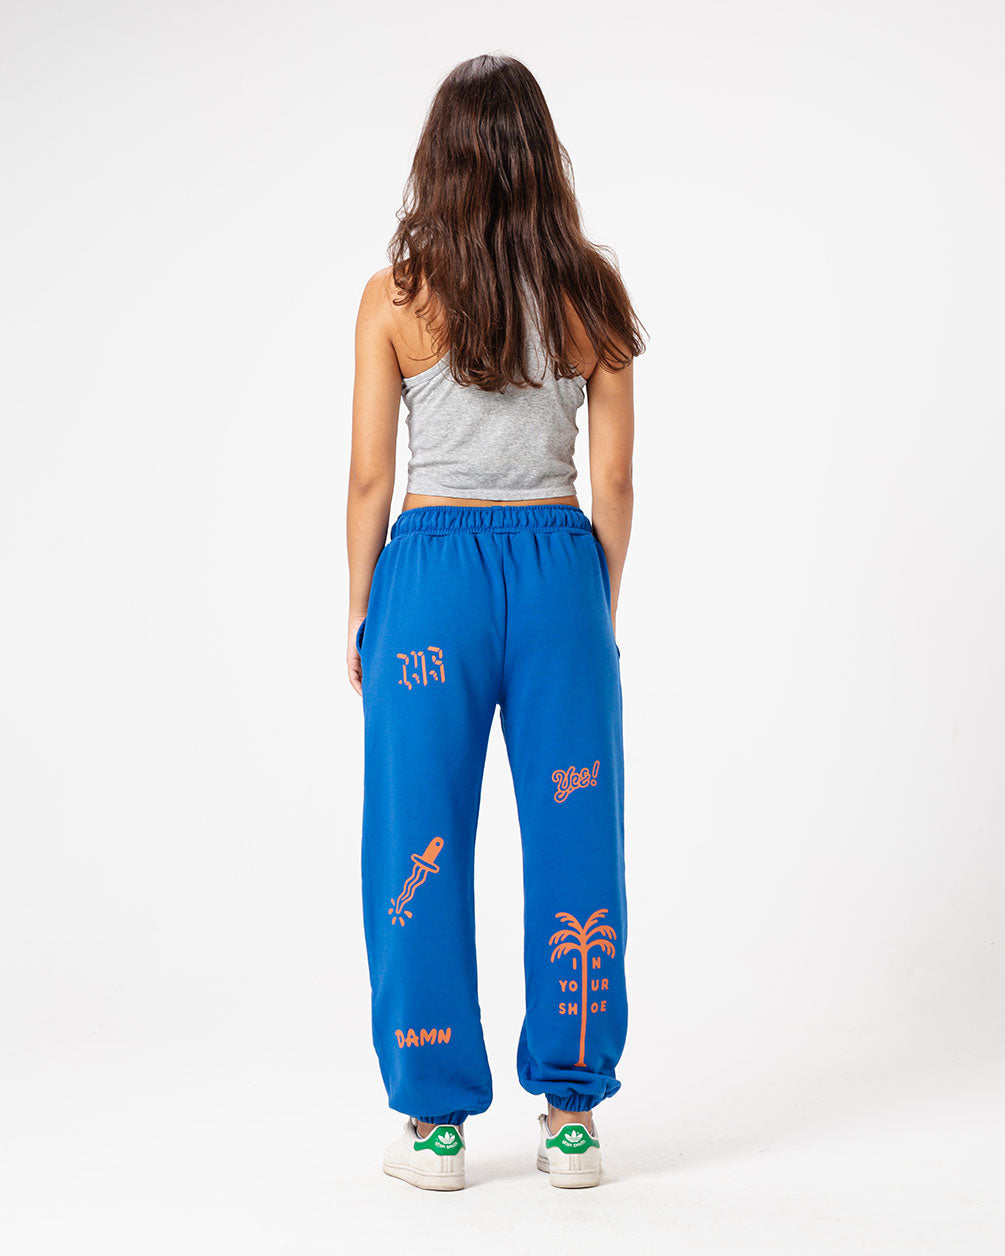 Blue Printed Swants (Sweatpants) Swants IN YOUR SHOE M 